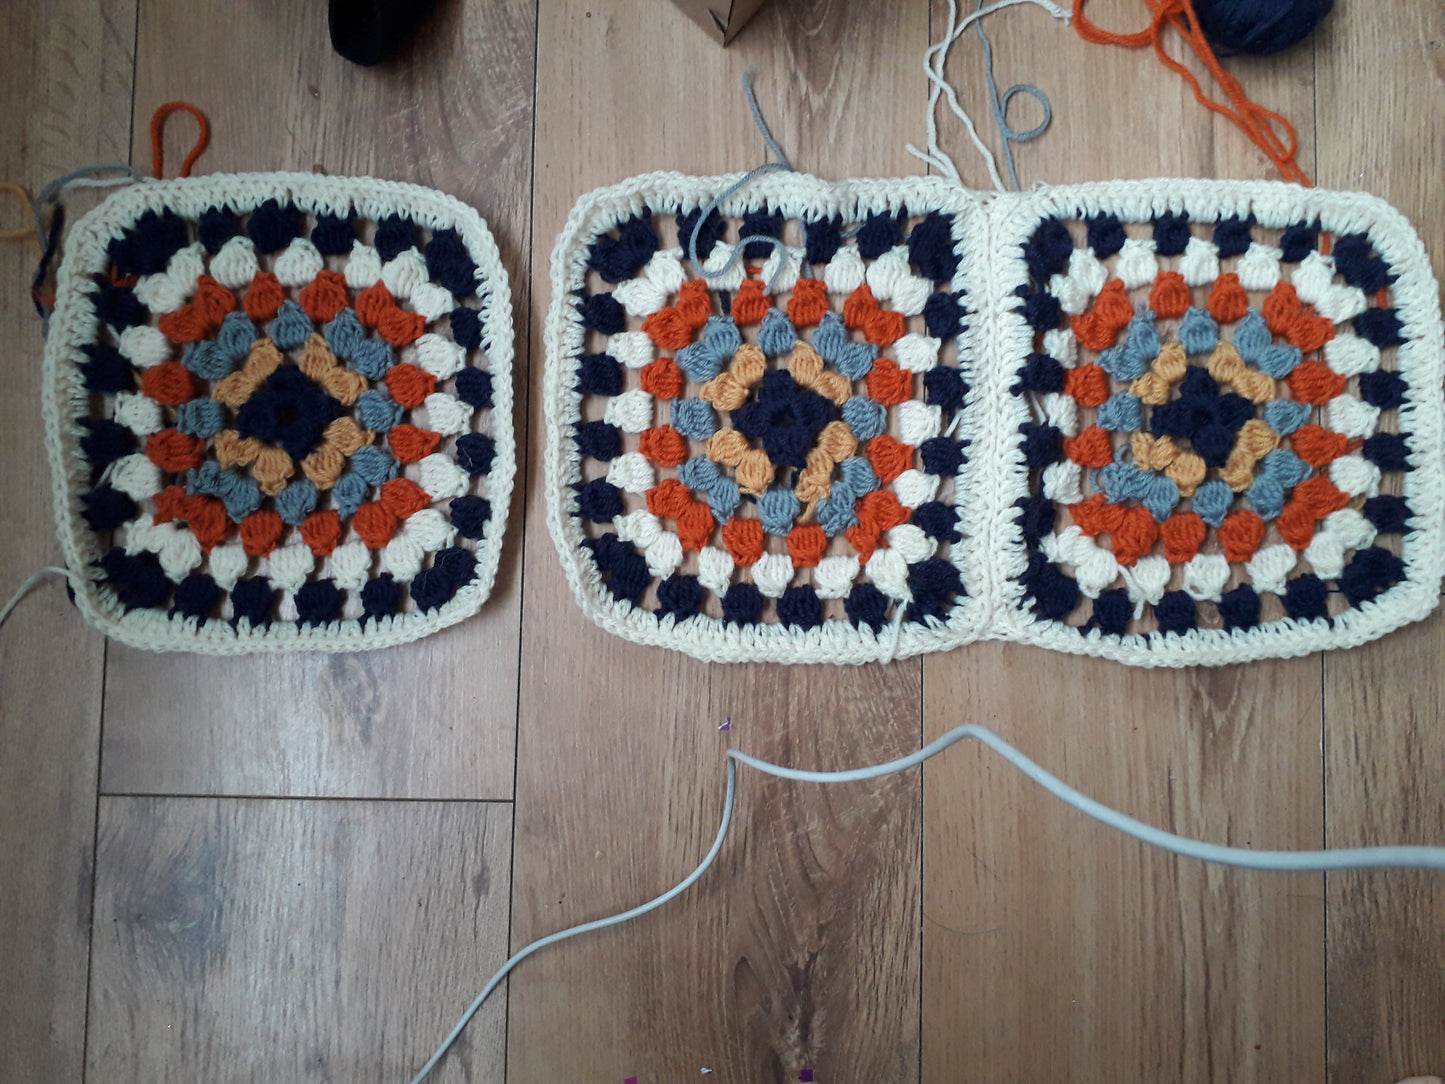 Image shows three crochet granny squares lined up next to each other on a hard wood floor. 